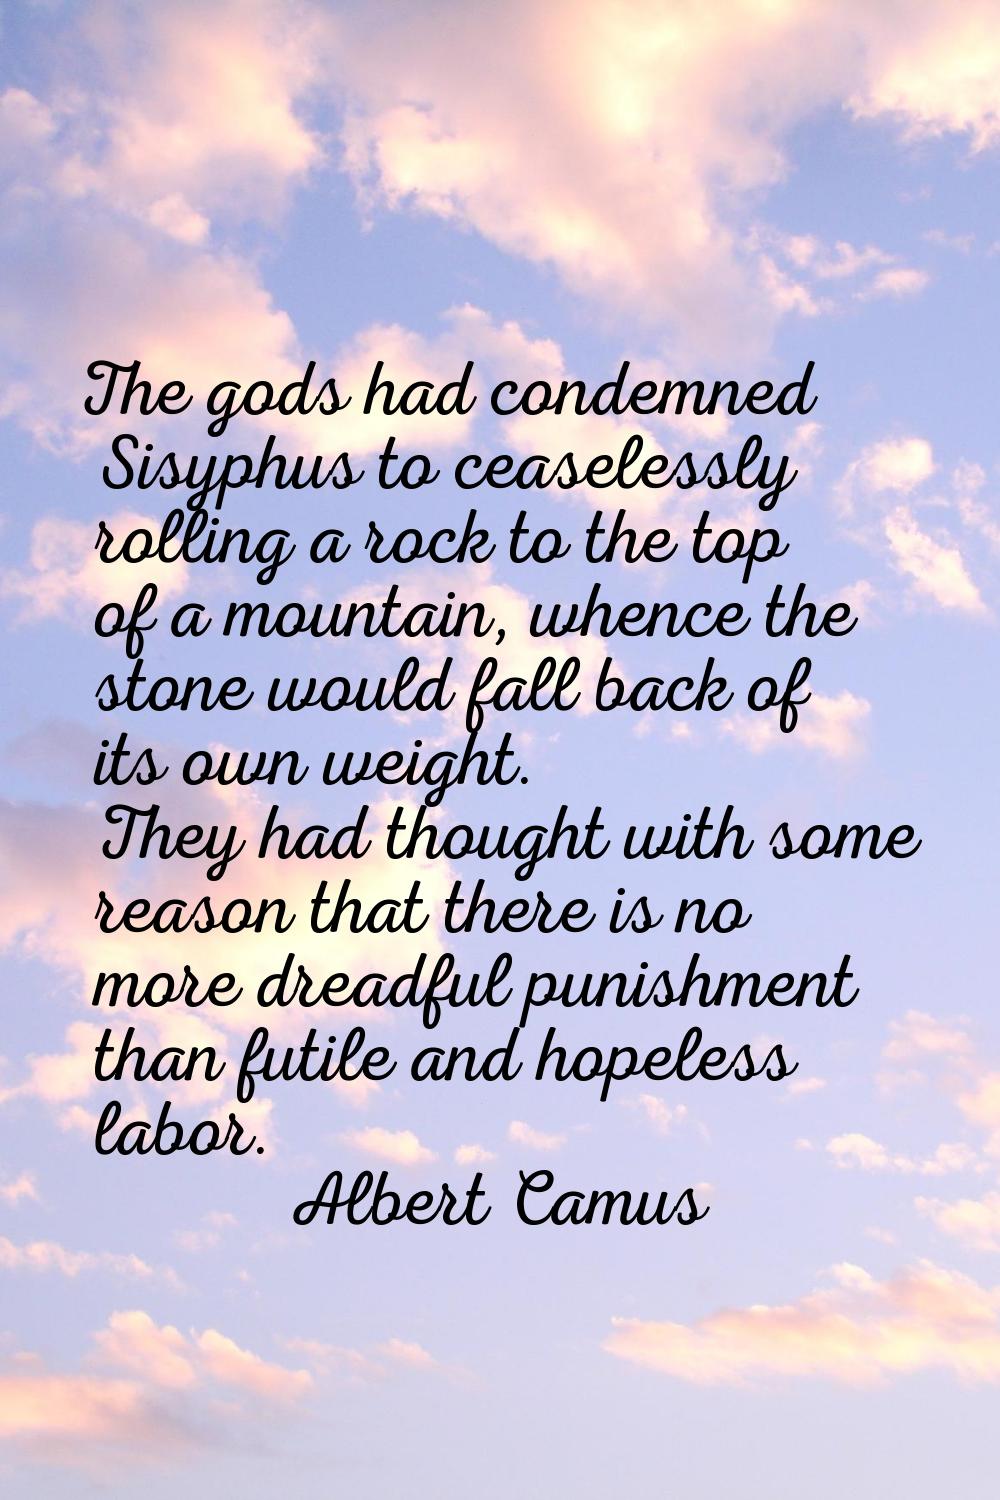 The gods had condemned Sisyphus to ceaselessly rolling a rock to the top of a mountain, whence the 